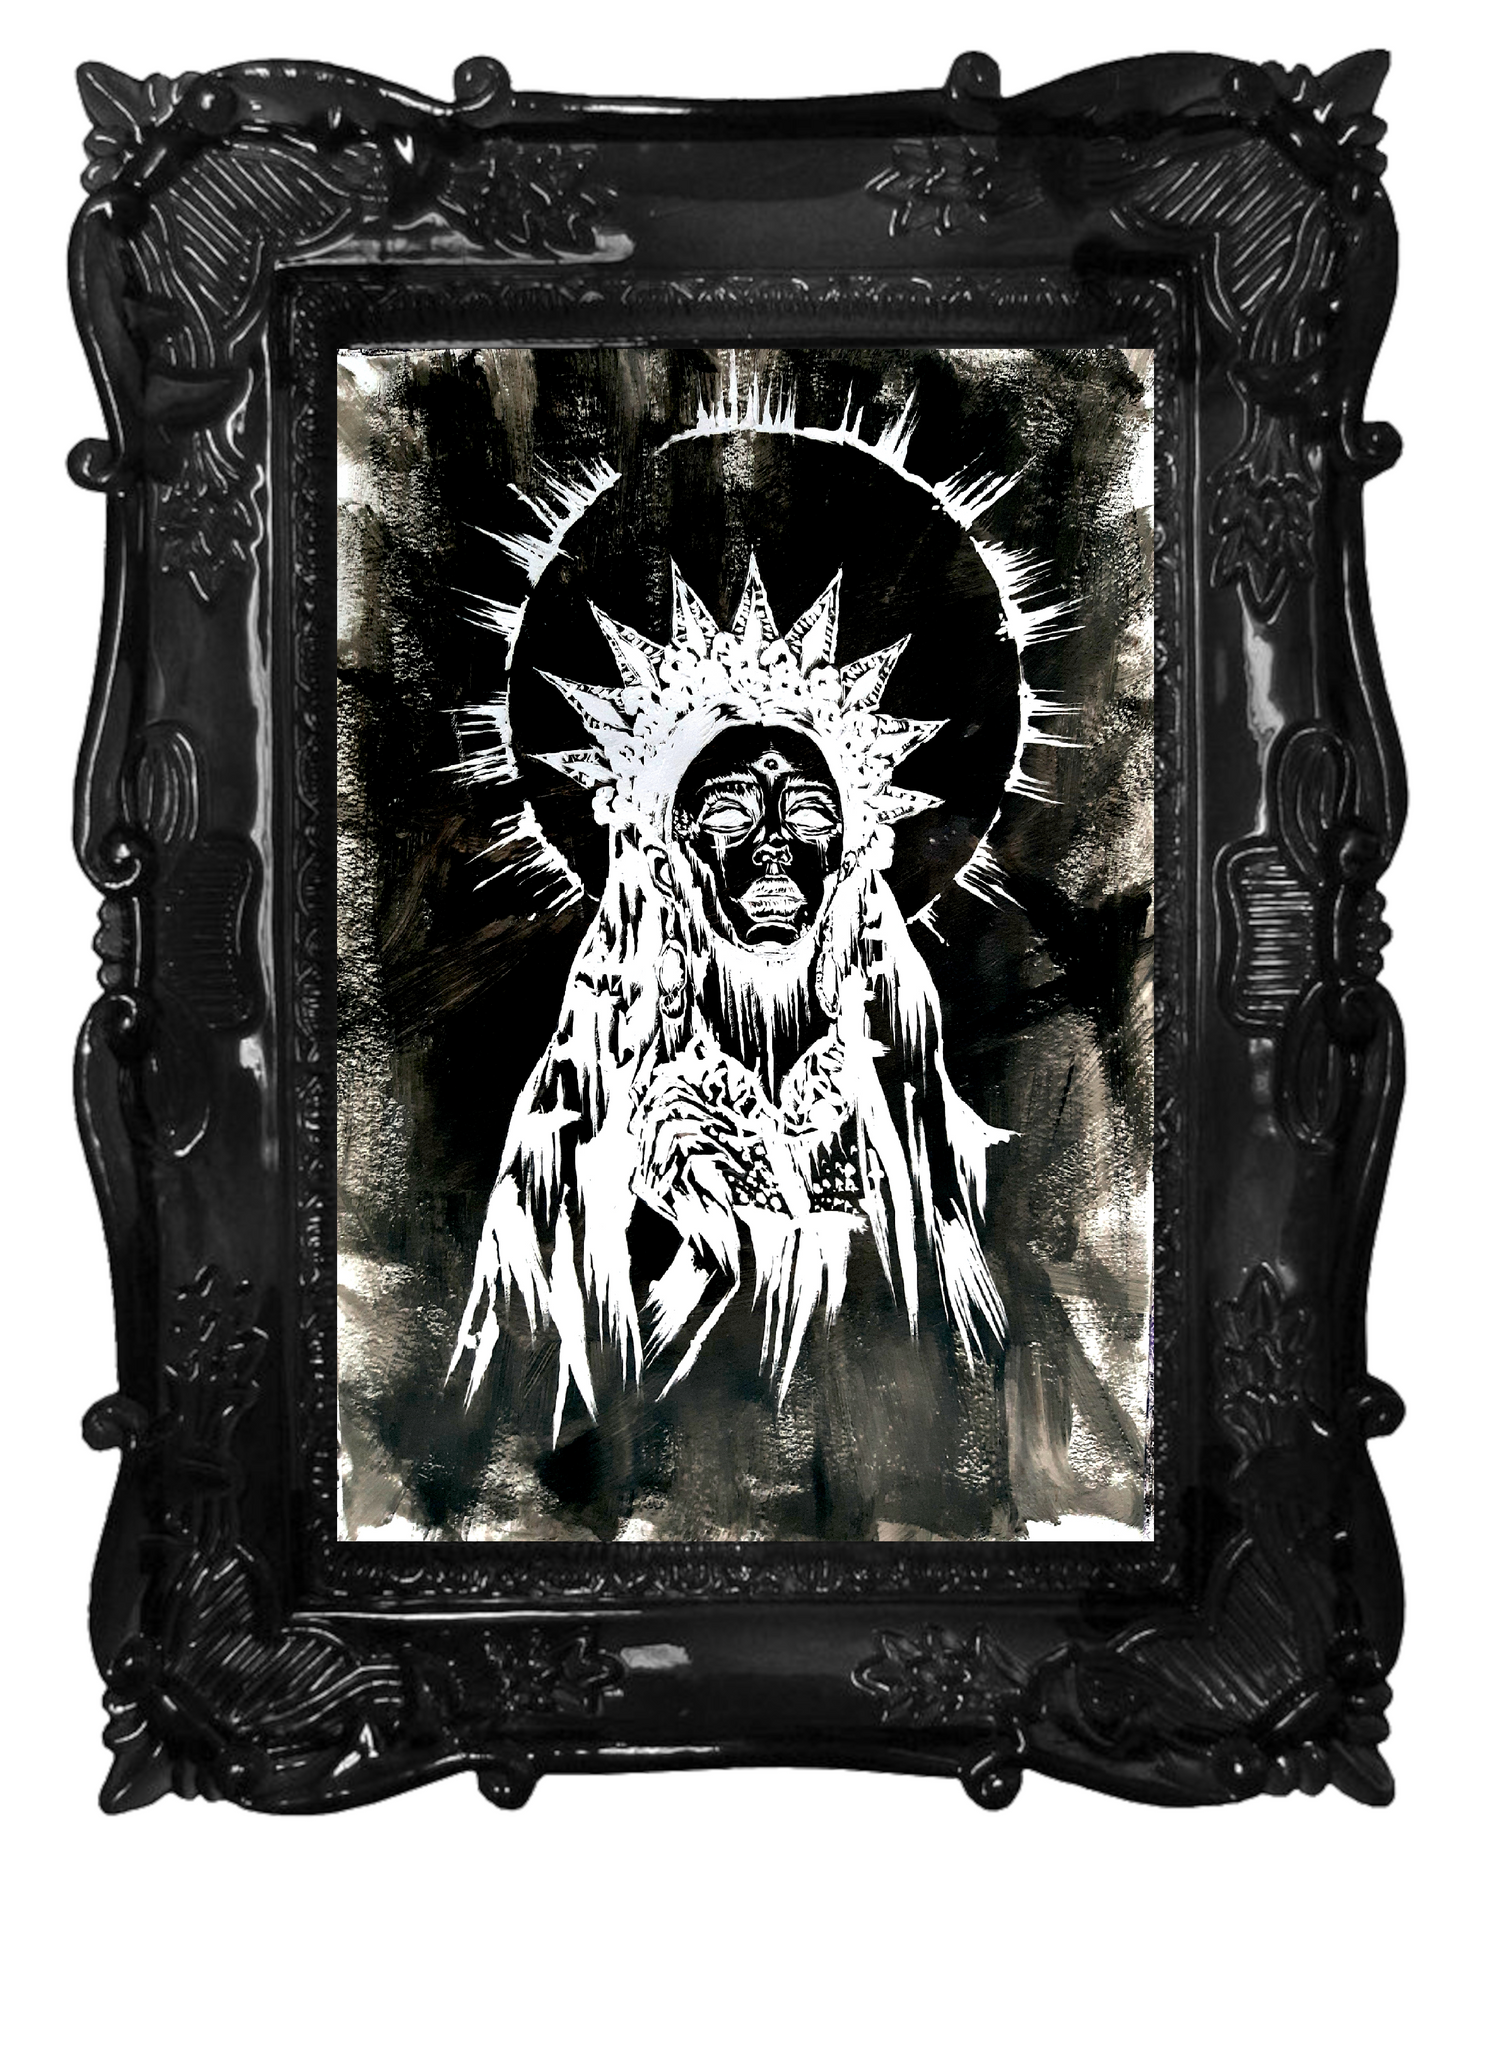 She sees all. Gothic home decor - Poster wall art. Black version